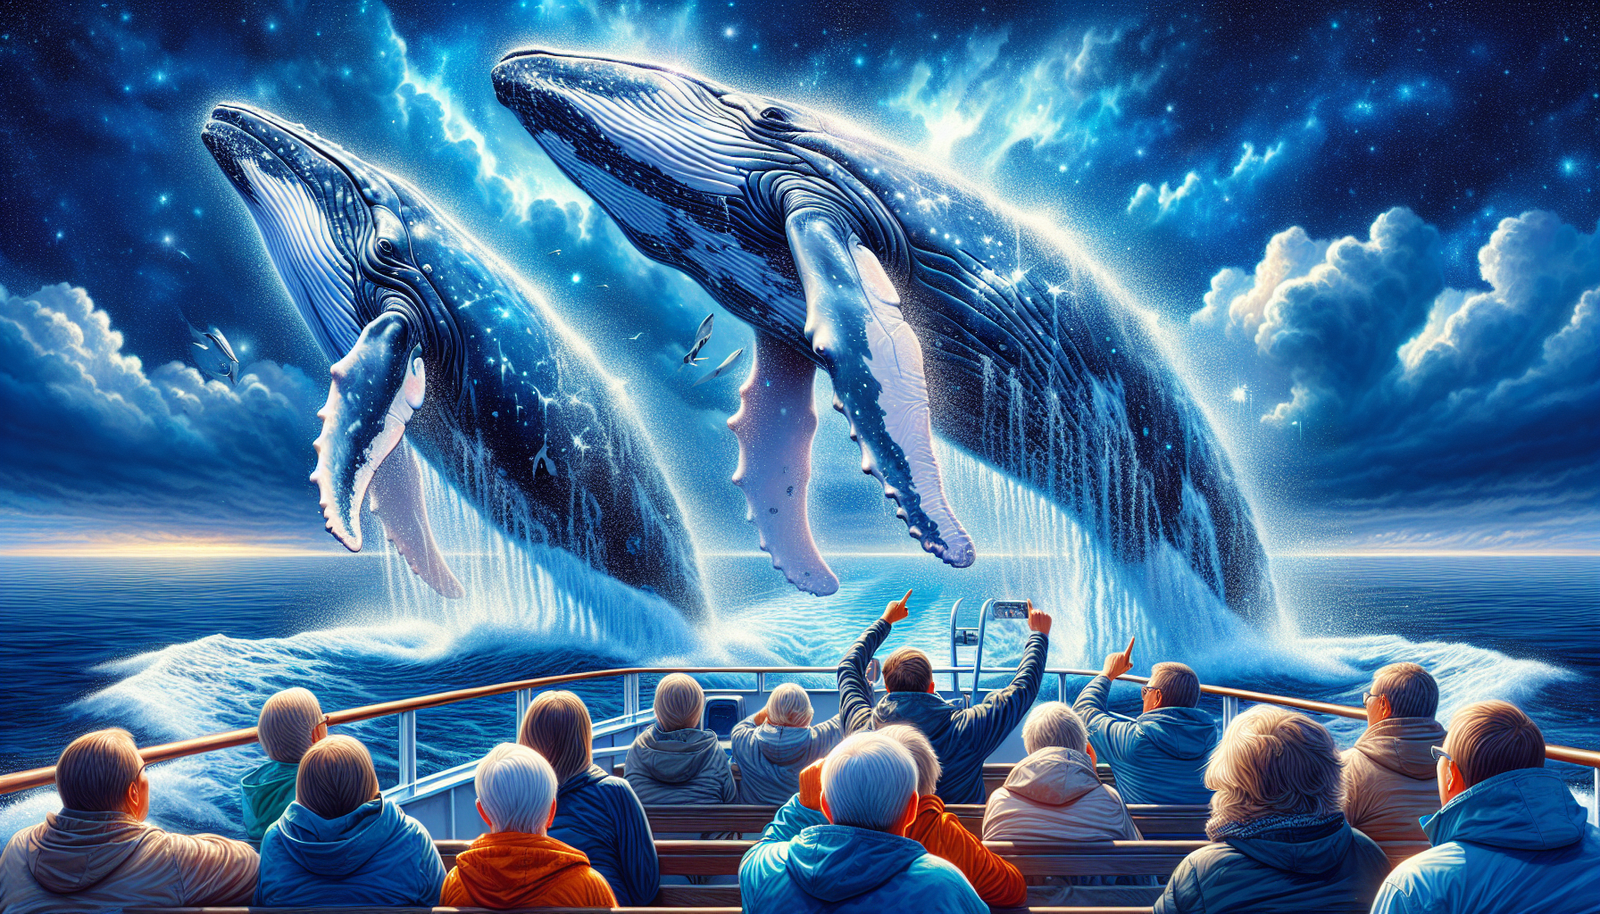 Majestic whales in the ocean